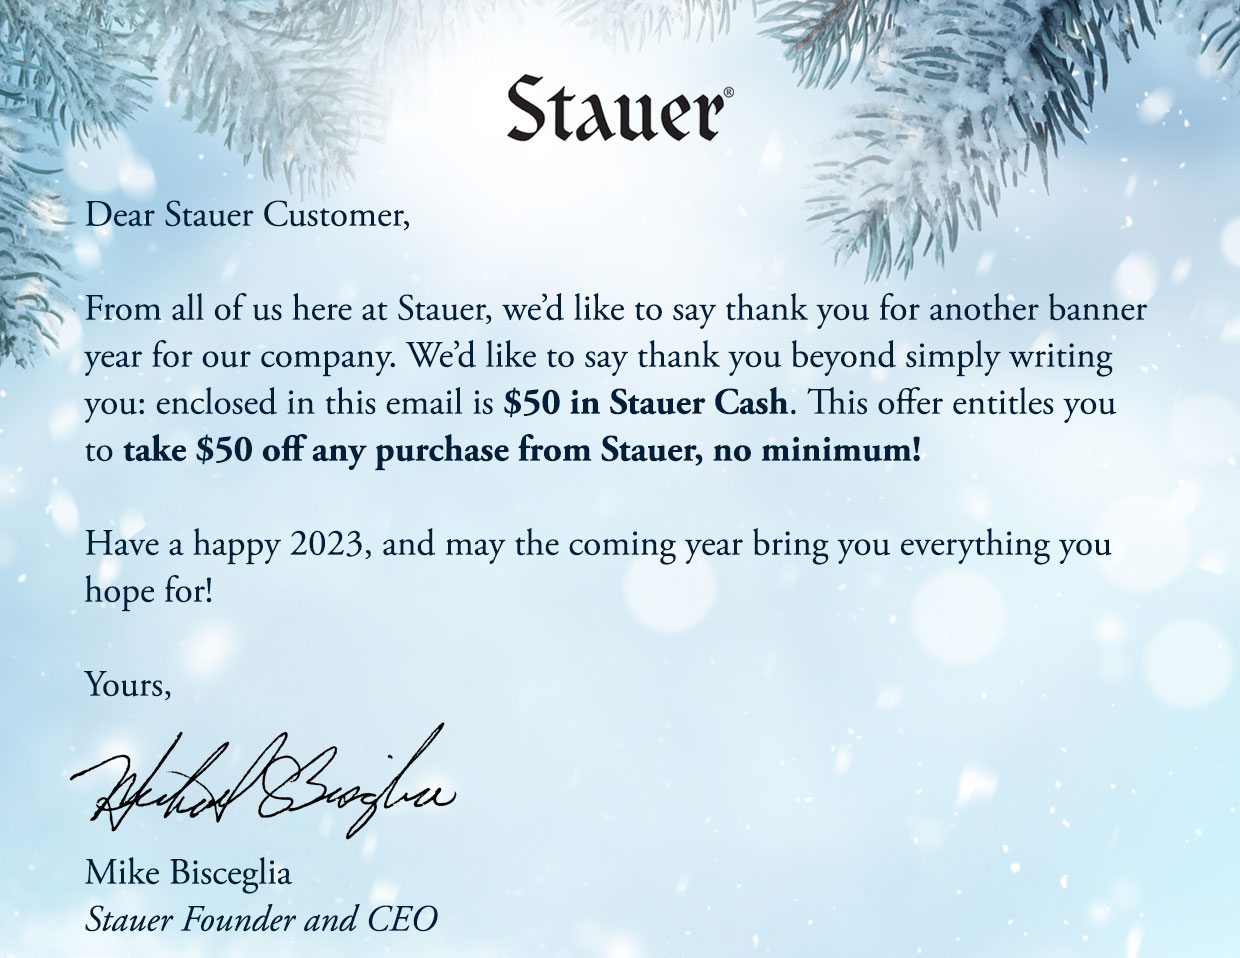 Dear Stauer Customer, From all of us here at Stauer, we'd like to say thank you for another banner year for our company. Wed like to say thank you beyond simply writing you: enclosed in this email is $50 in Stauer Cash. This offer entitles you to take $50 off any purchase from Stauer, no minimum! Have a happy 2023, and may the coming year bring you everything you hope for! Yours, Mike Bisceglia Stauer Founder and CEO